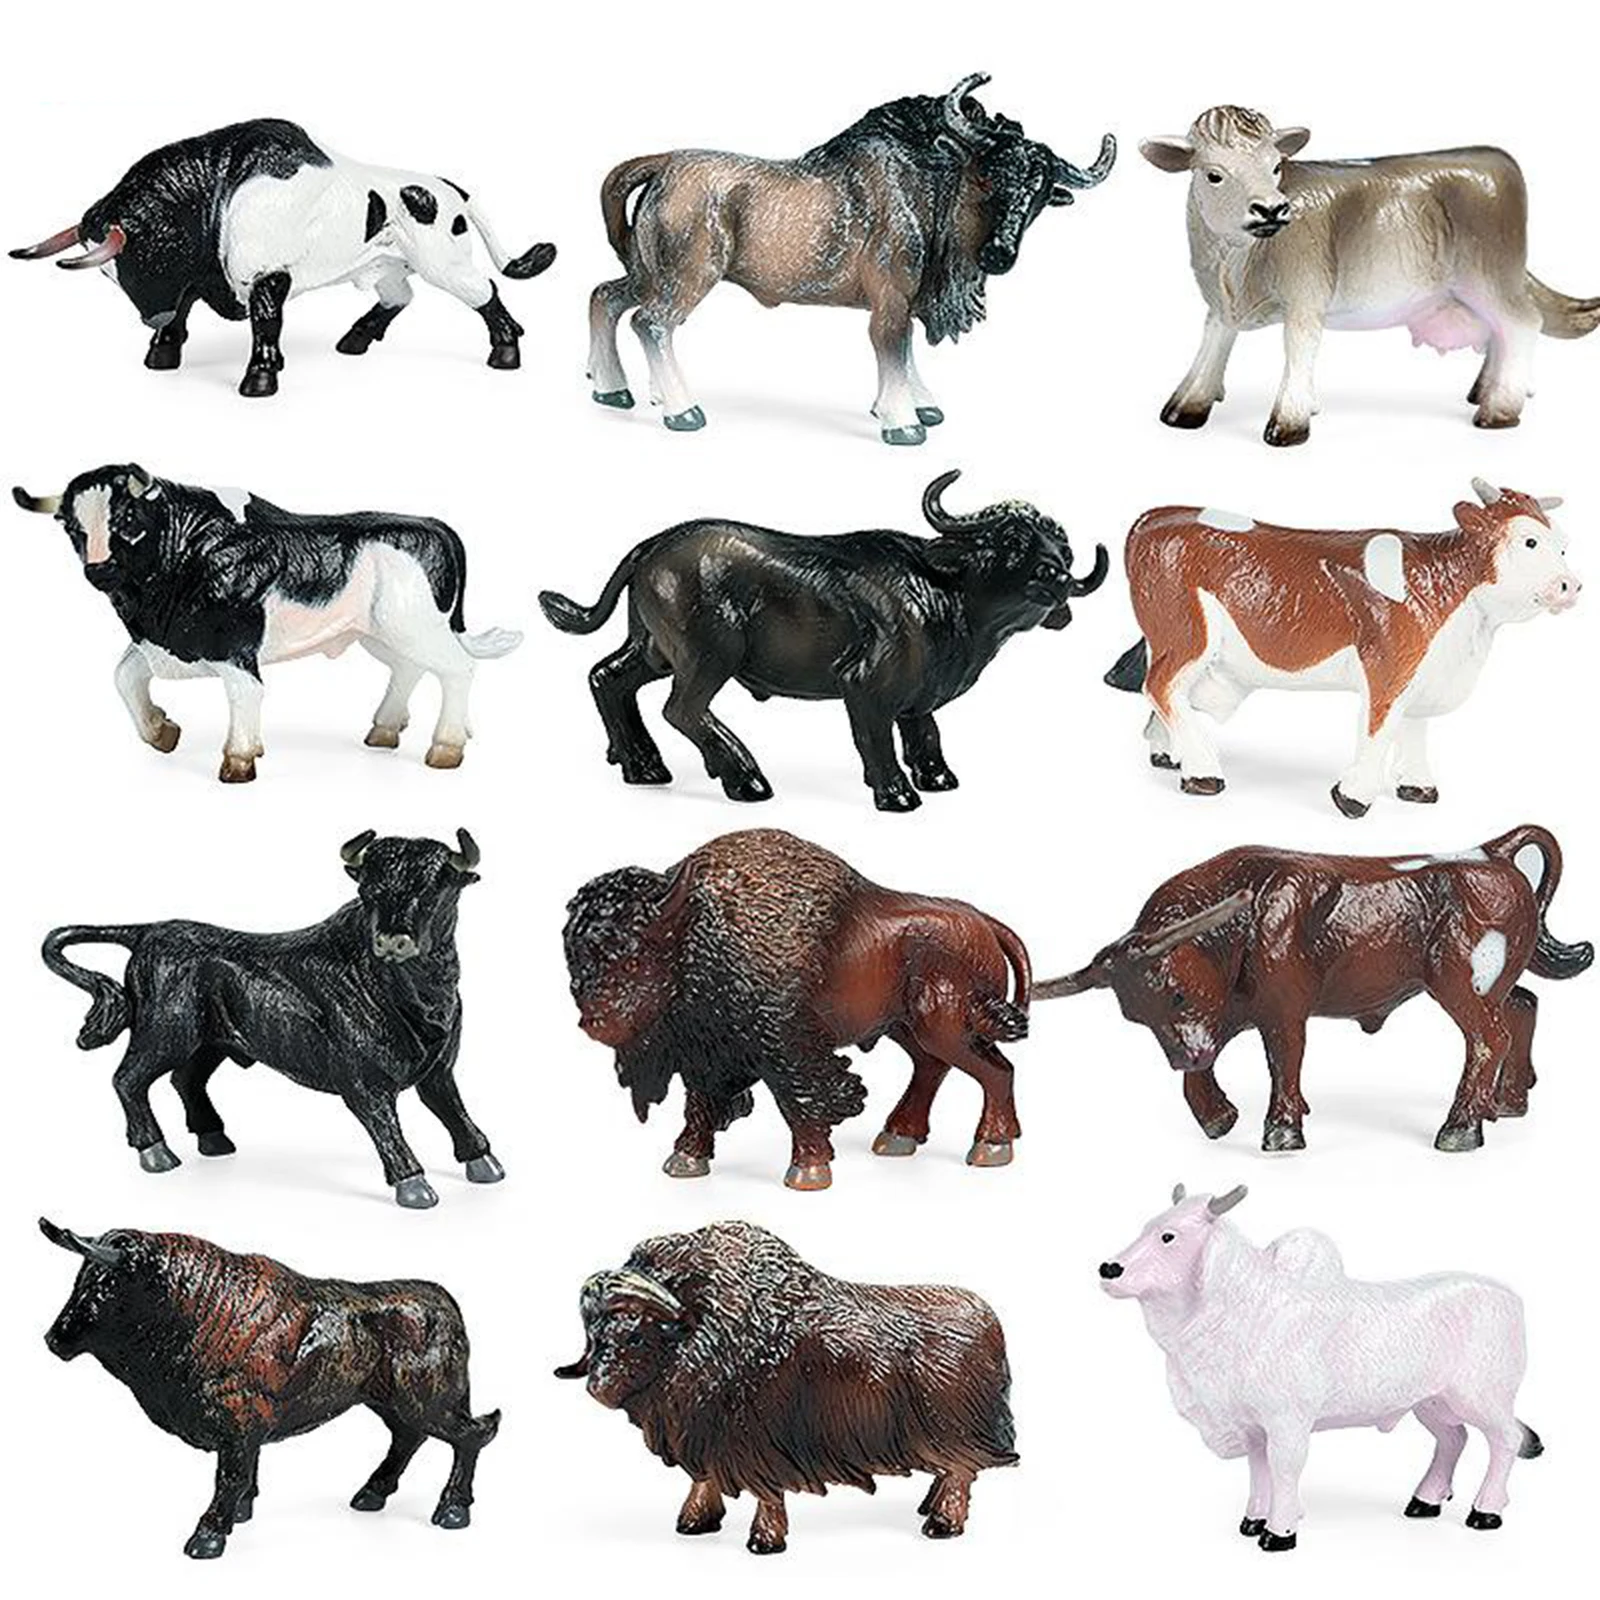 Educational Cow Figurine with Realistic Animals of Simulated Bull 4 Pieces for Children 3-8